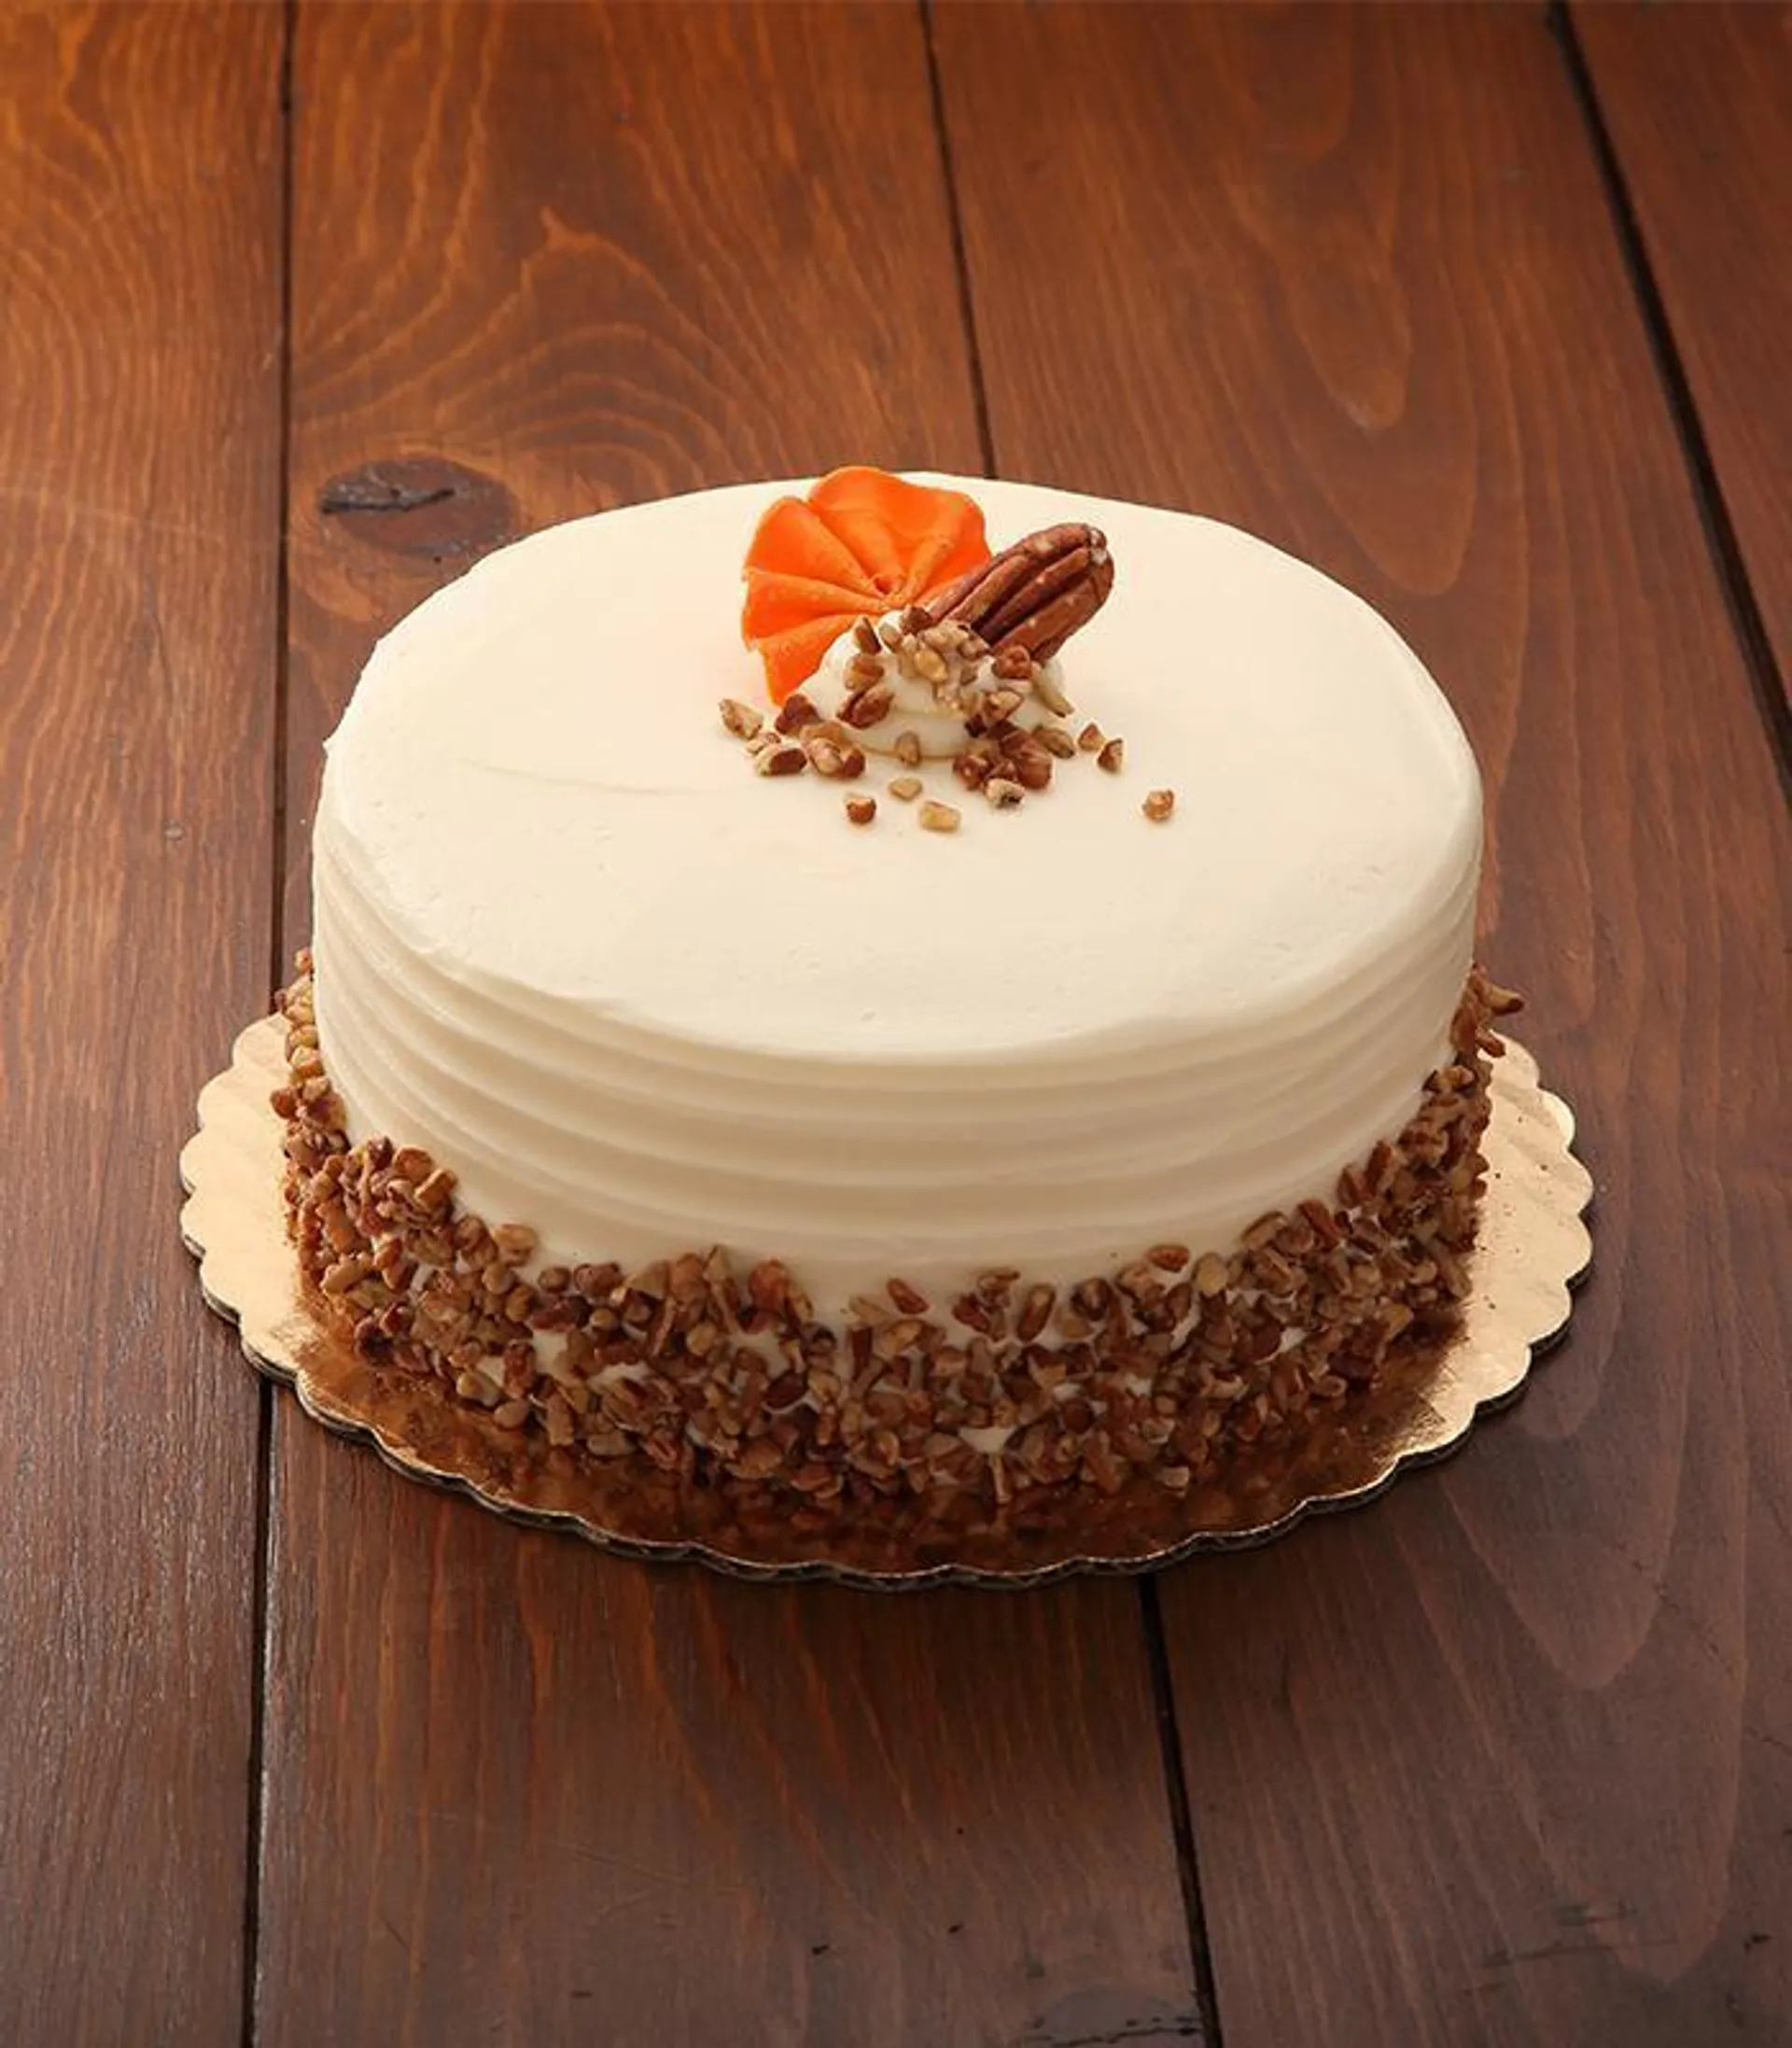 Carrot Cake - 7” Double Layer (Serves 8-12)